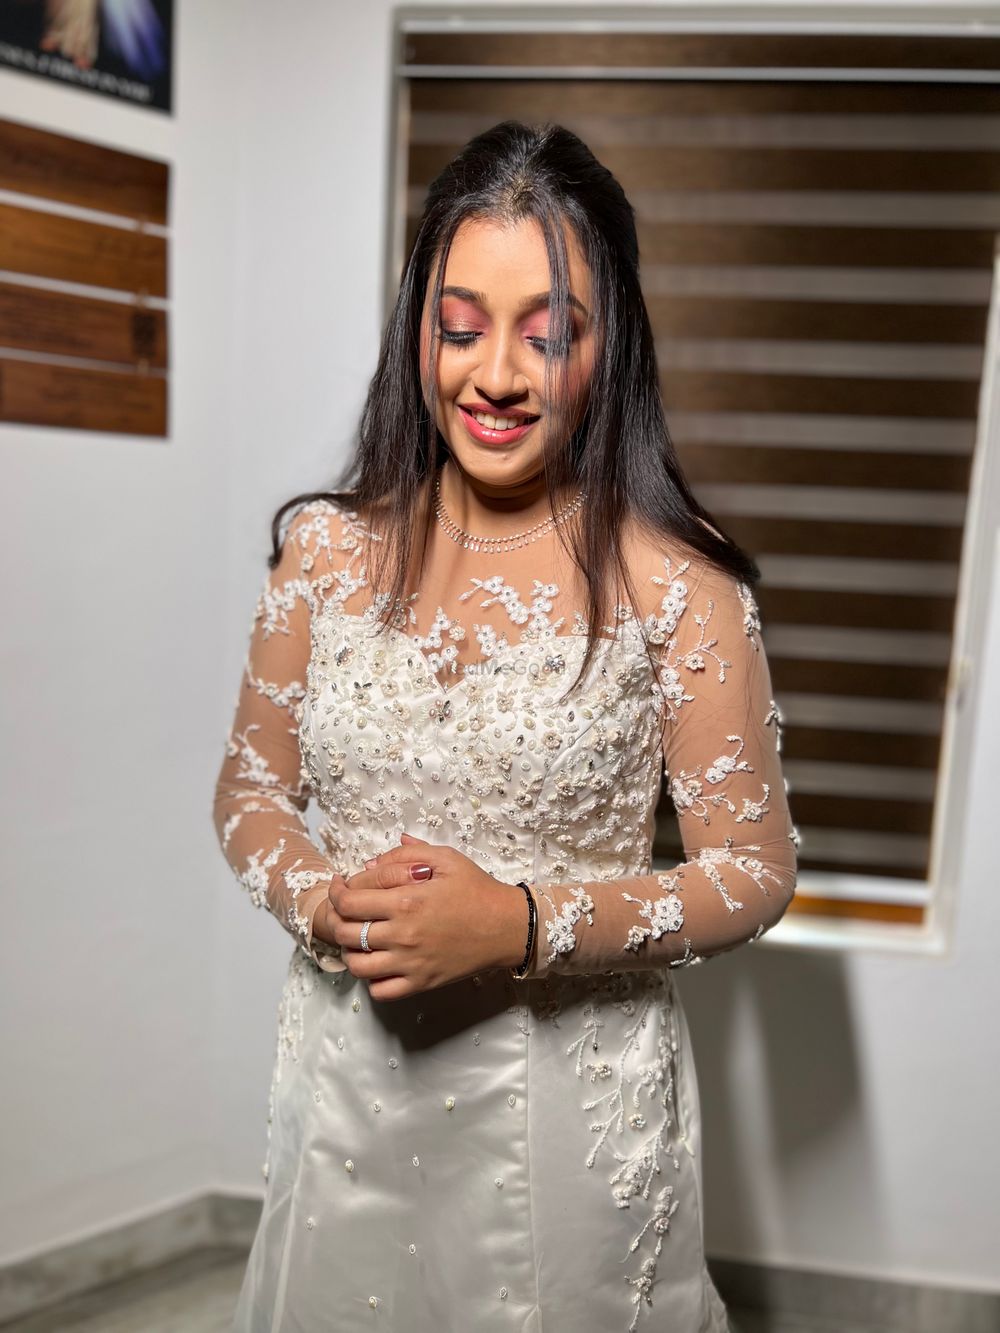 Photo From Christian Brides - By Sujani Professional Makeup Artist